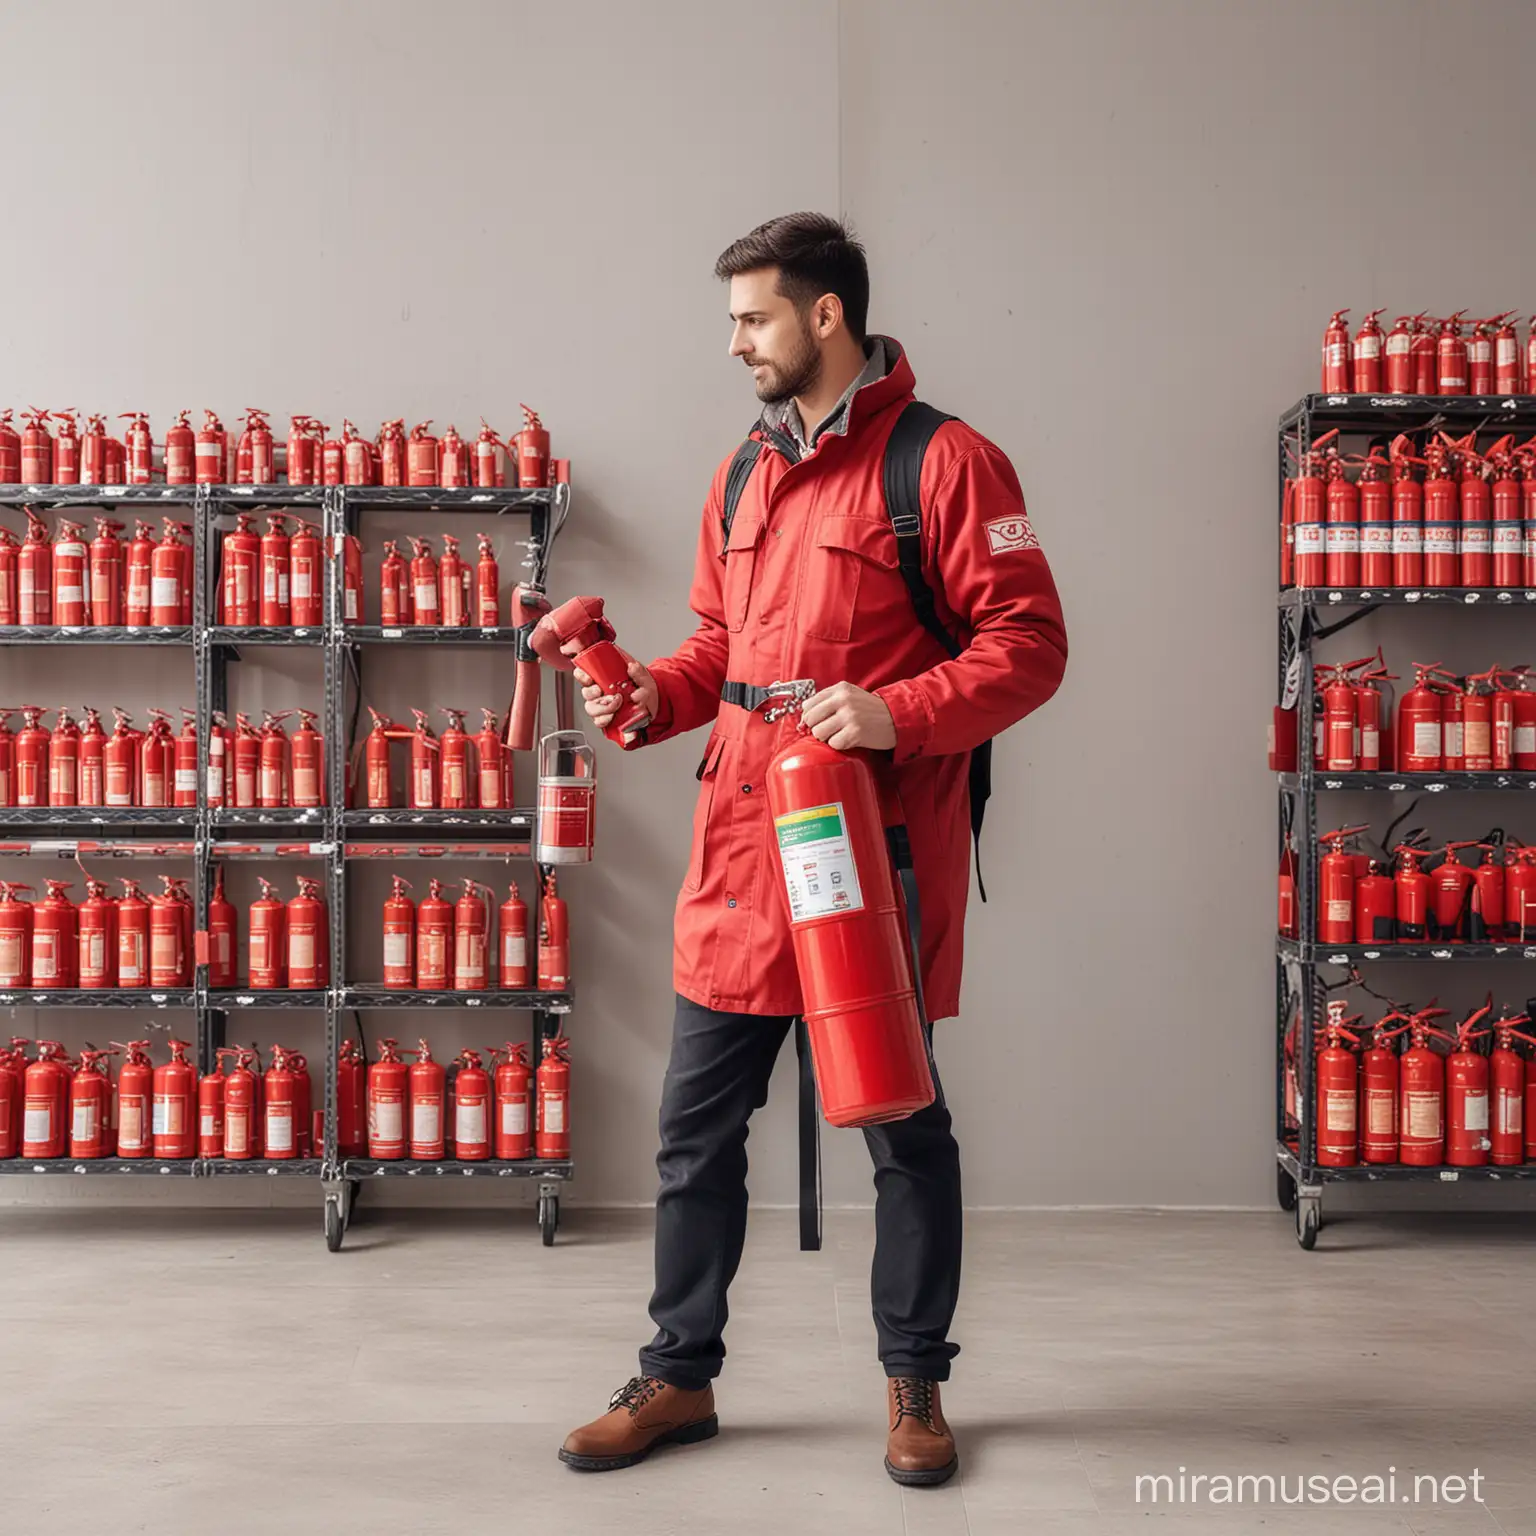 Person Buying Fire Extinguisher in Hardware Store